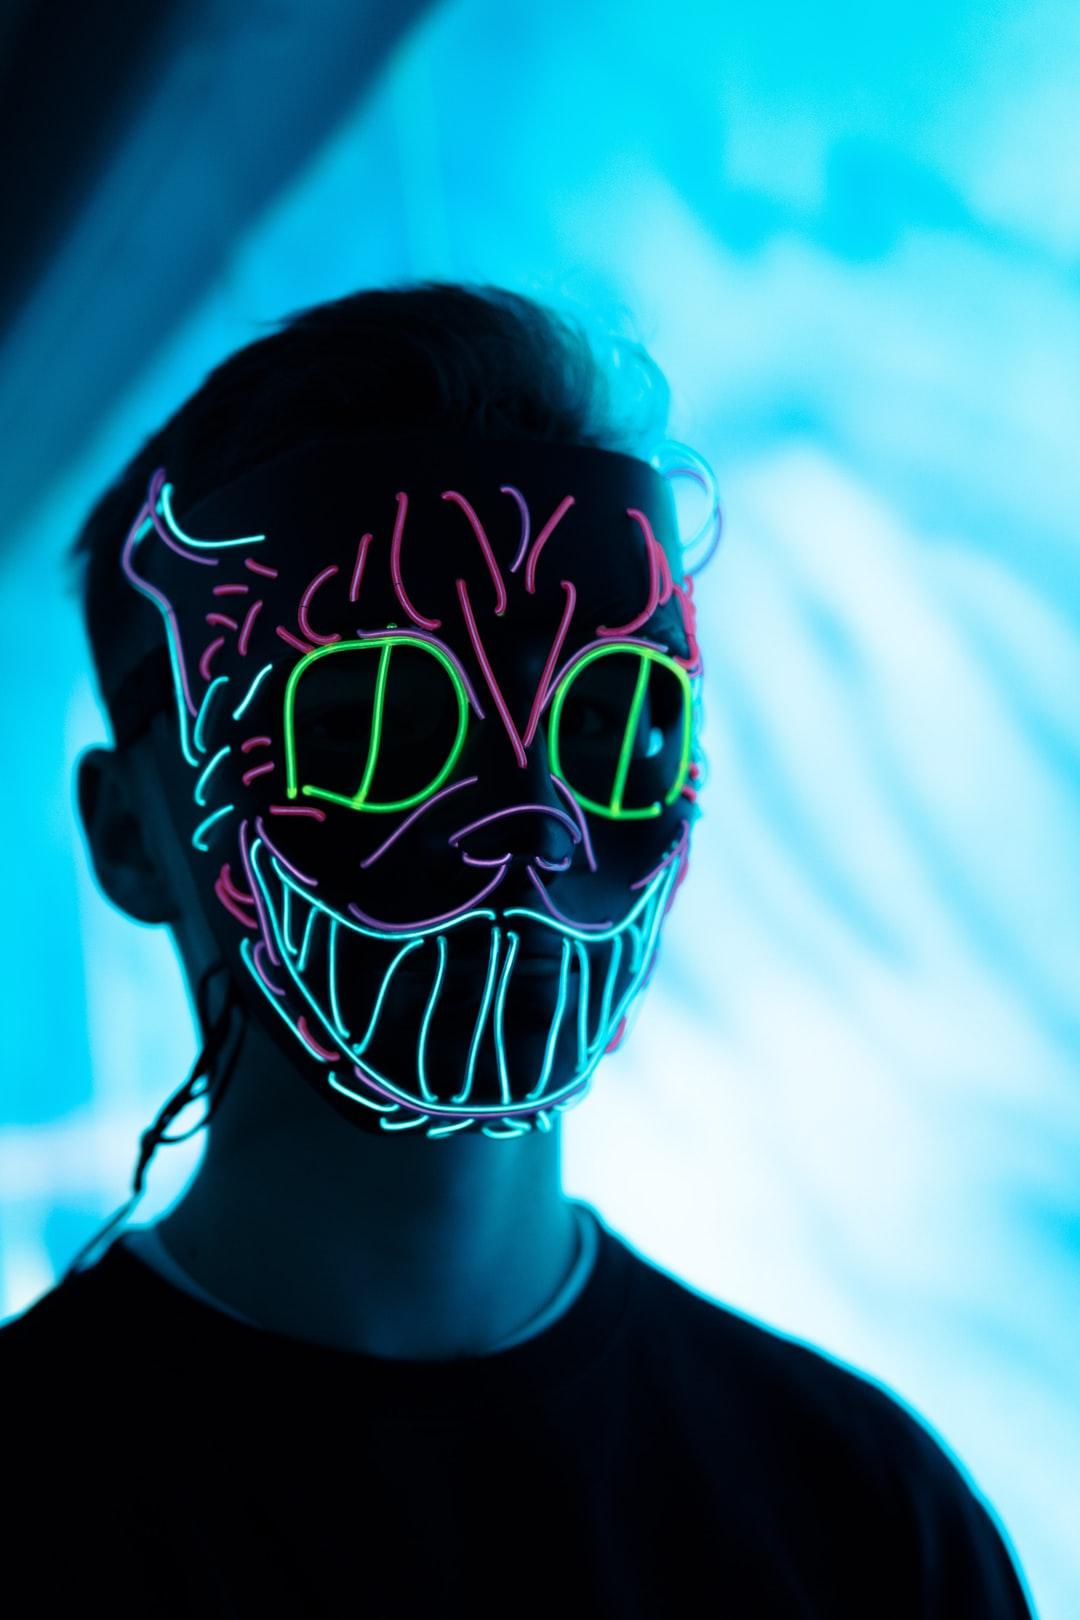 Neon Mask Picture. Download Free Image